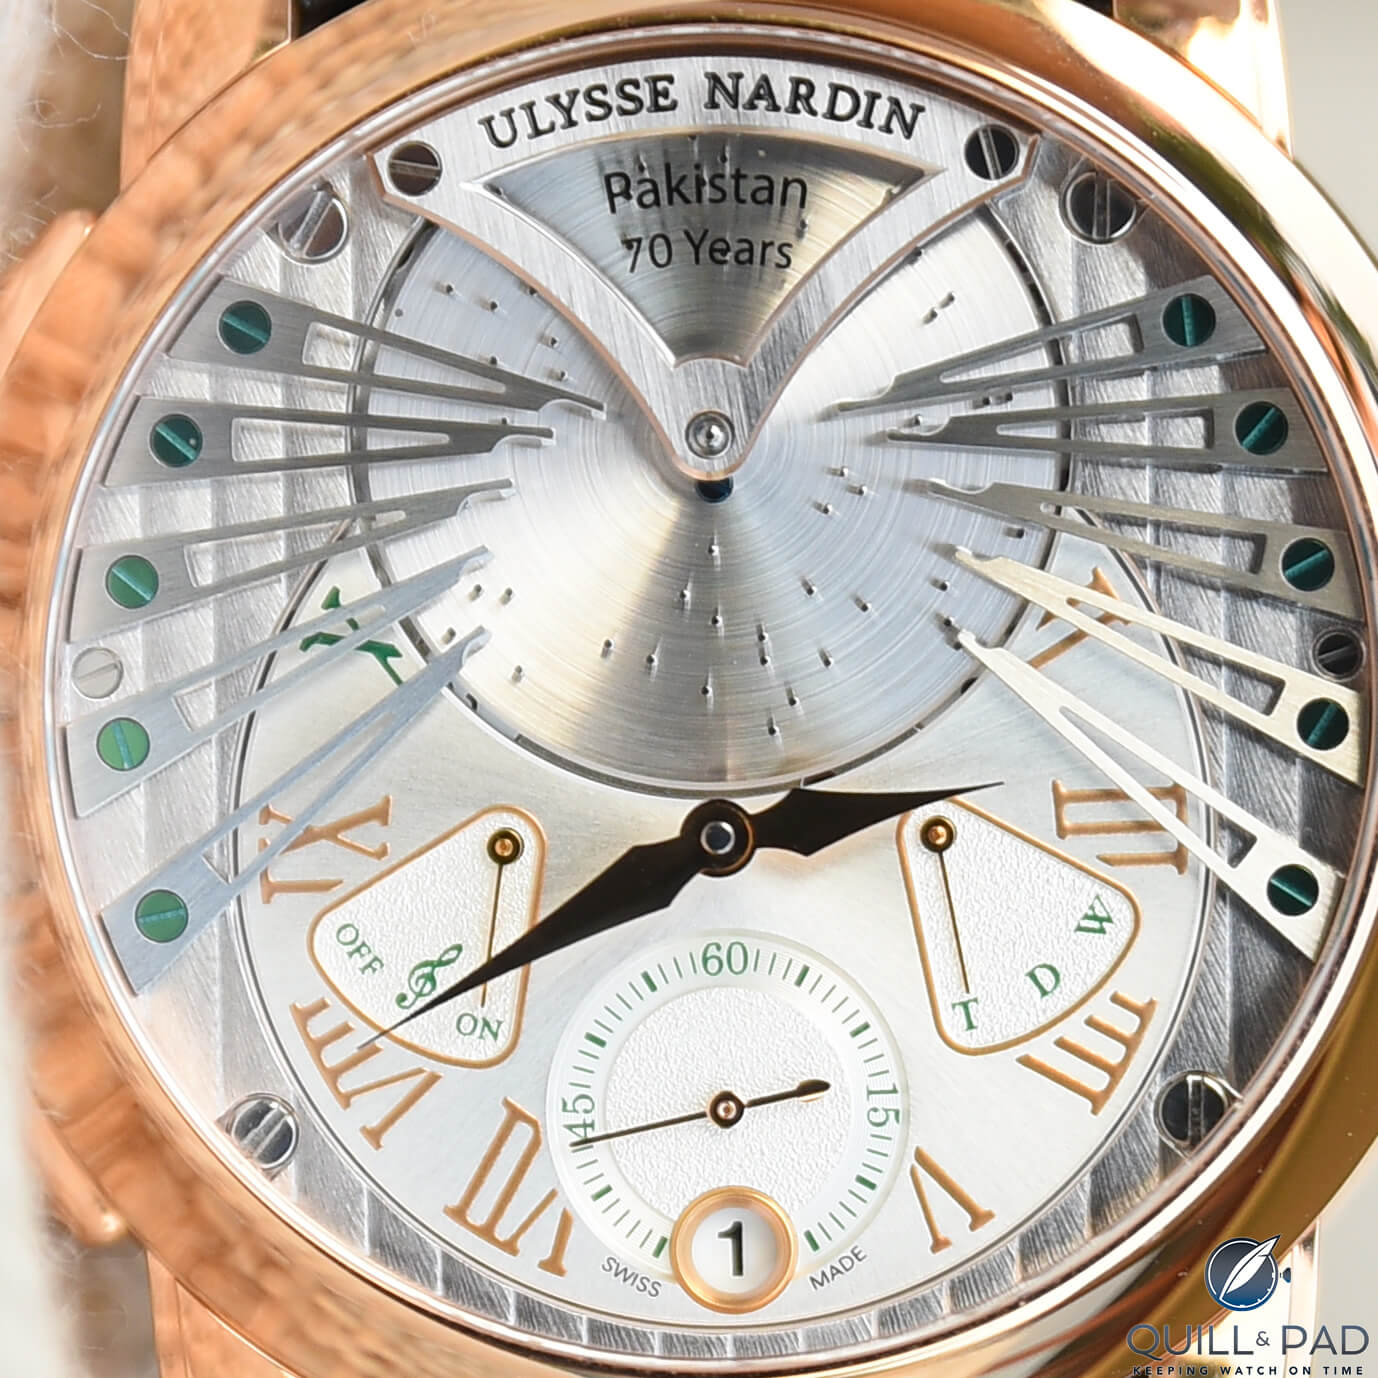 Close up look at the dial of the Ulysse Nardin Stranger Anthem